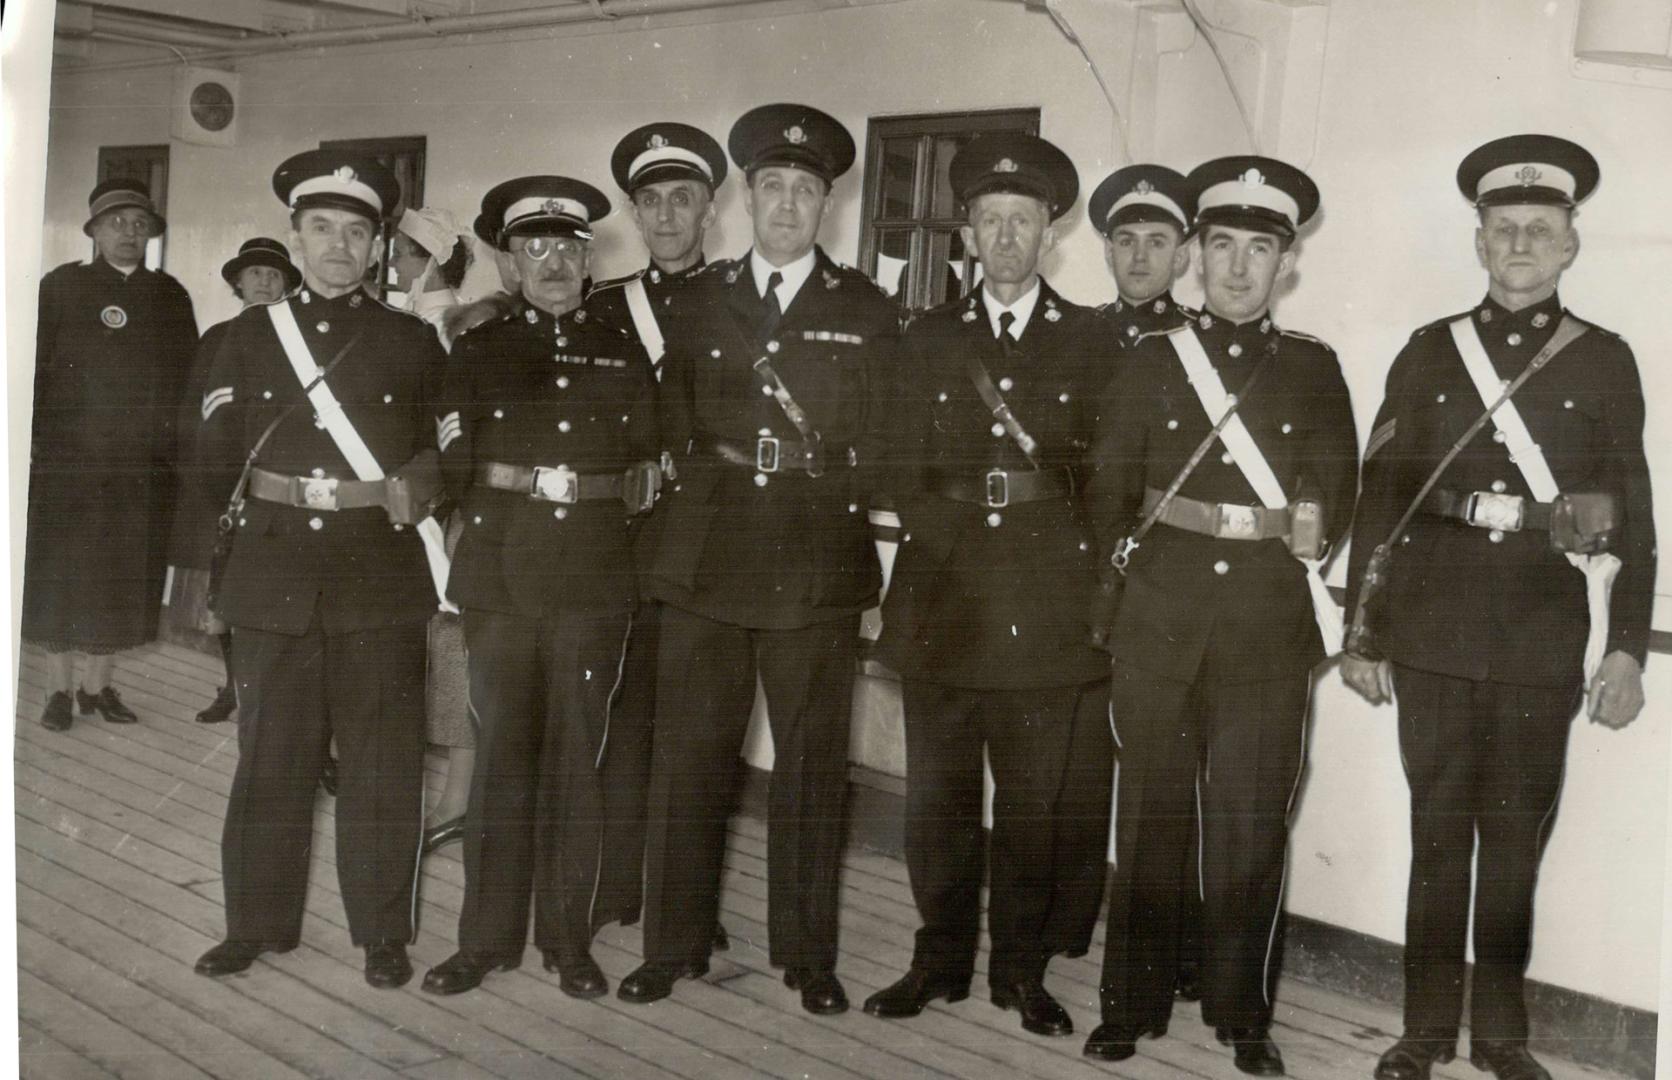 St. John's Ambulance Brigade to Coronation and Anniversary., On board the Canadian Pacific liner Montcalm the above group of St. John's Ambulance Brig(...)